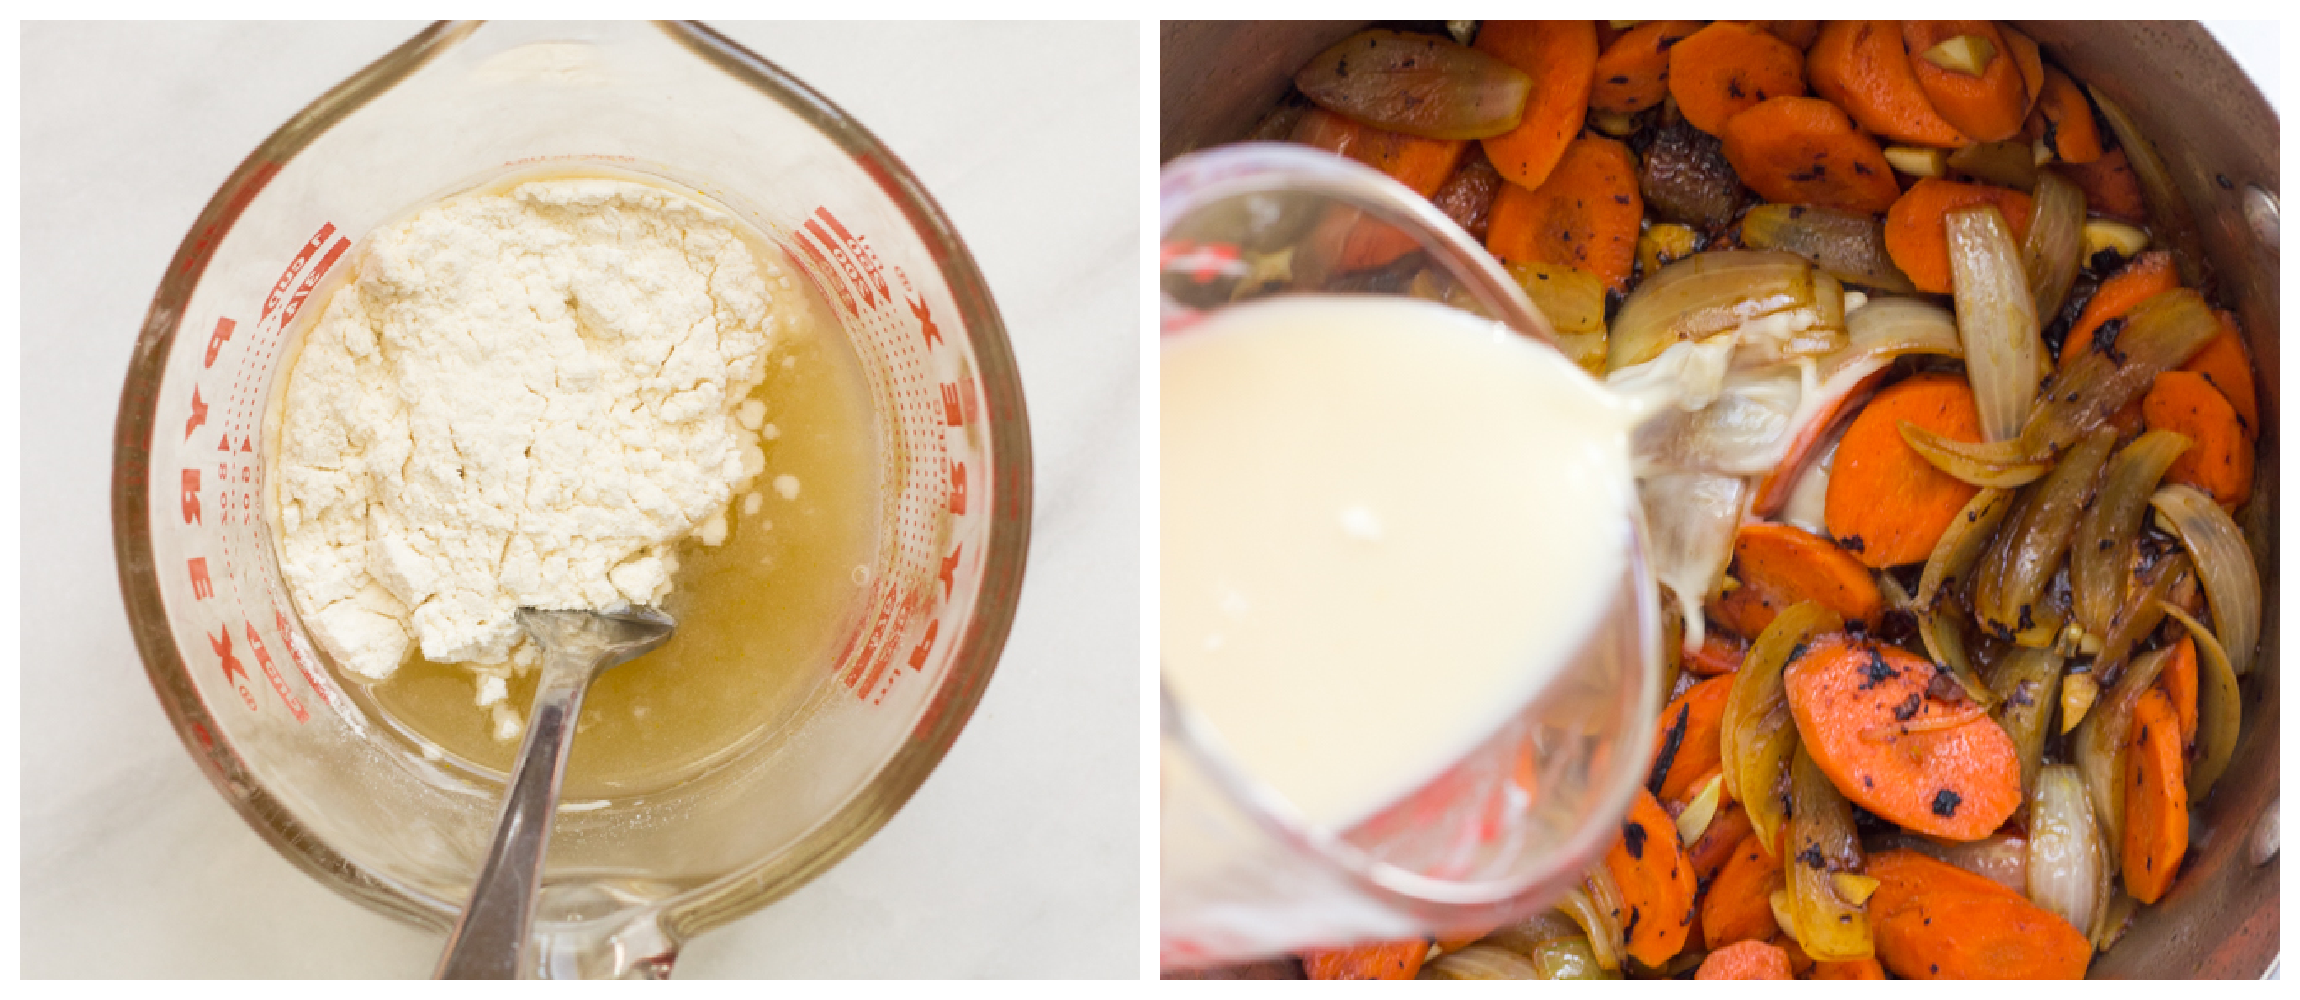 two photos, showing glass measuring cup with broth and flour in one, and cooked veggies with broth flour mixture in second.